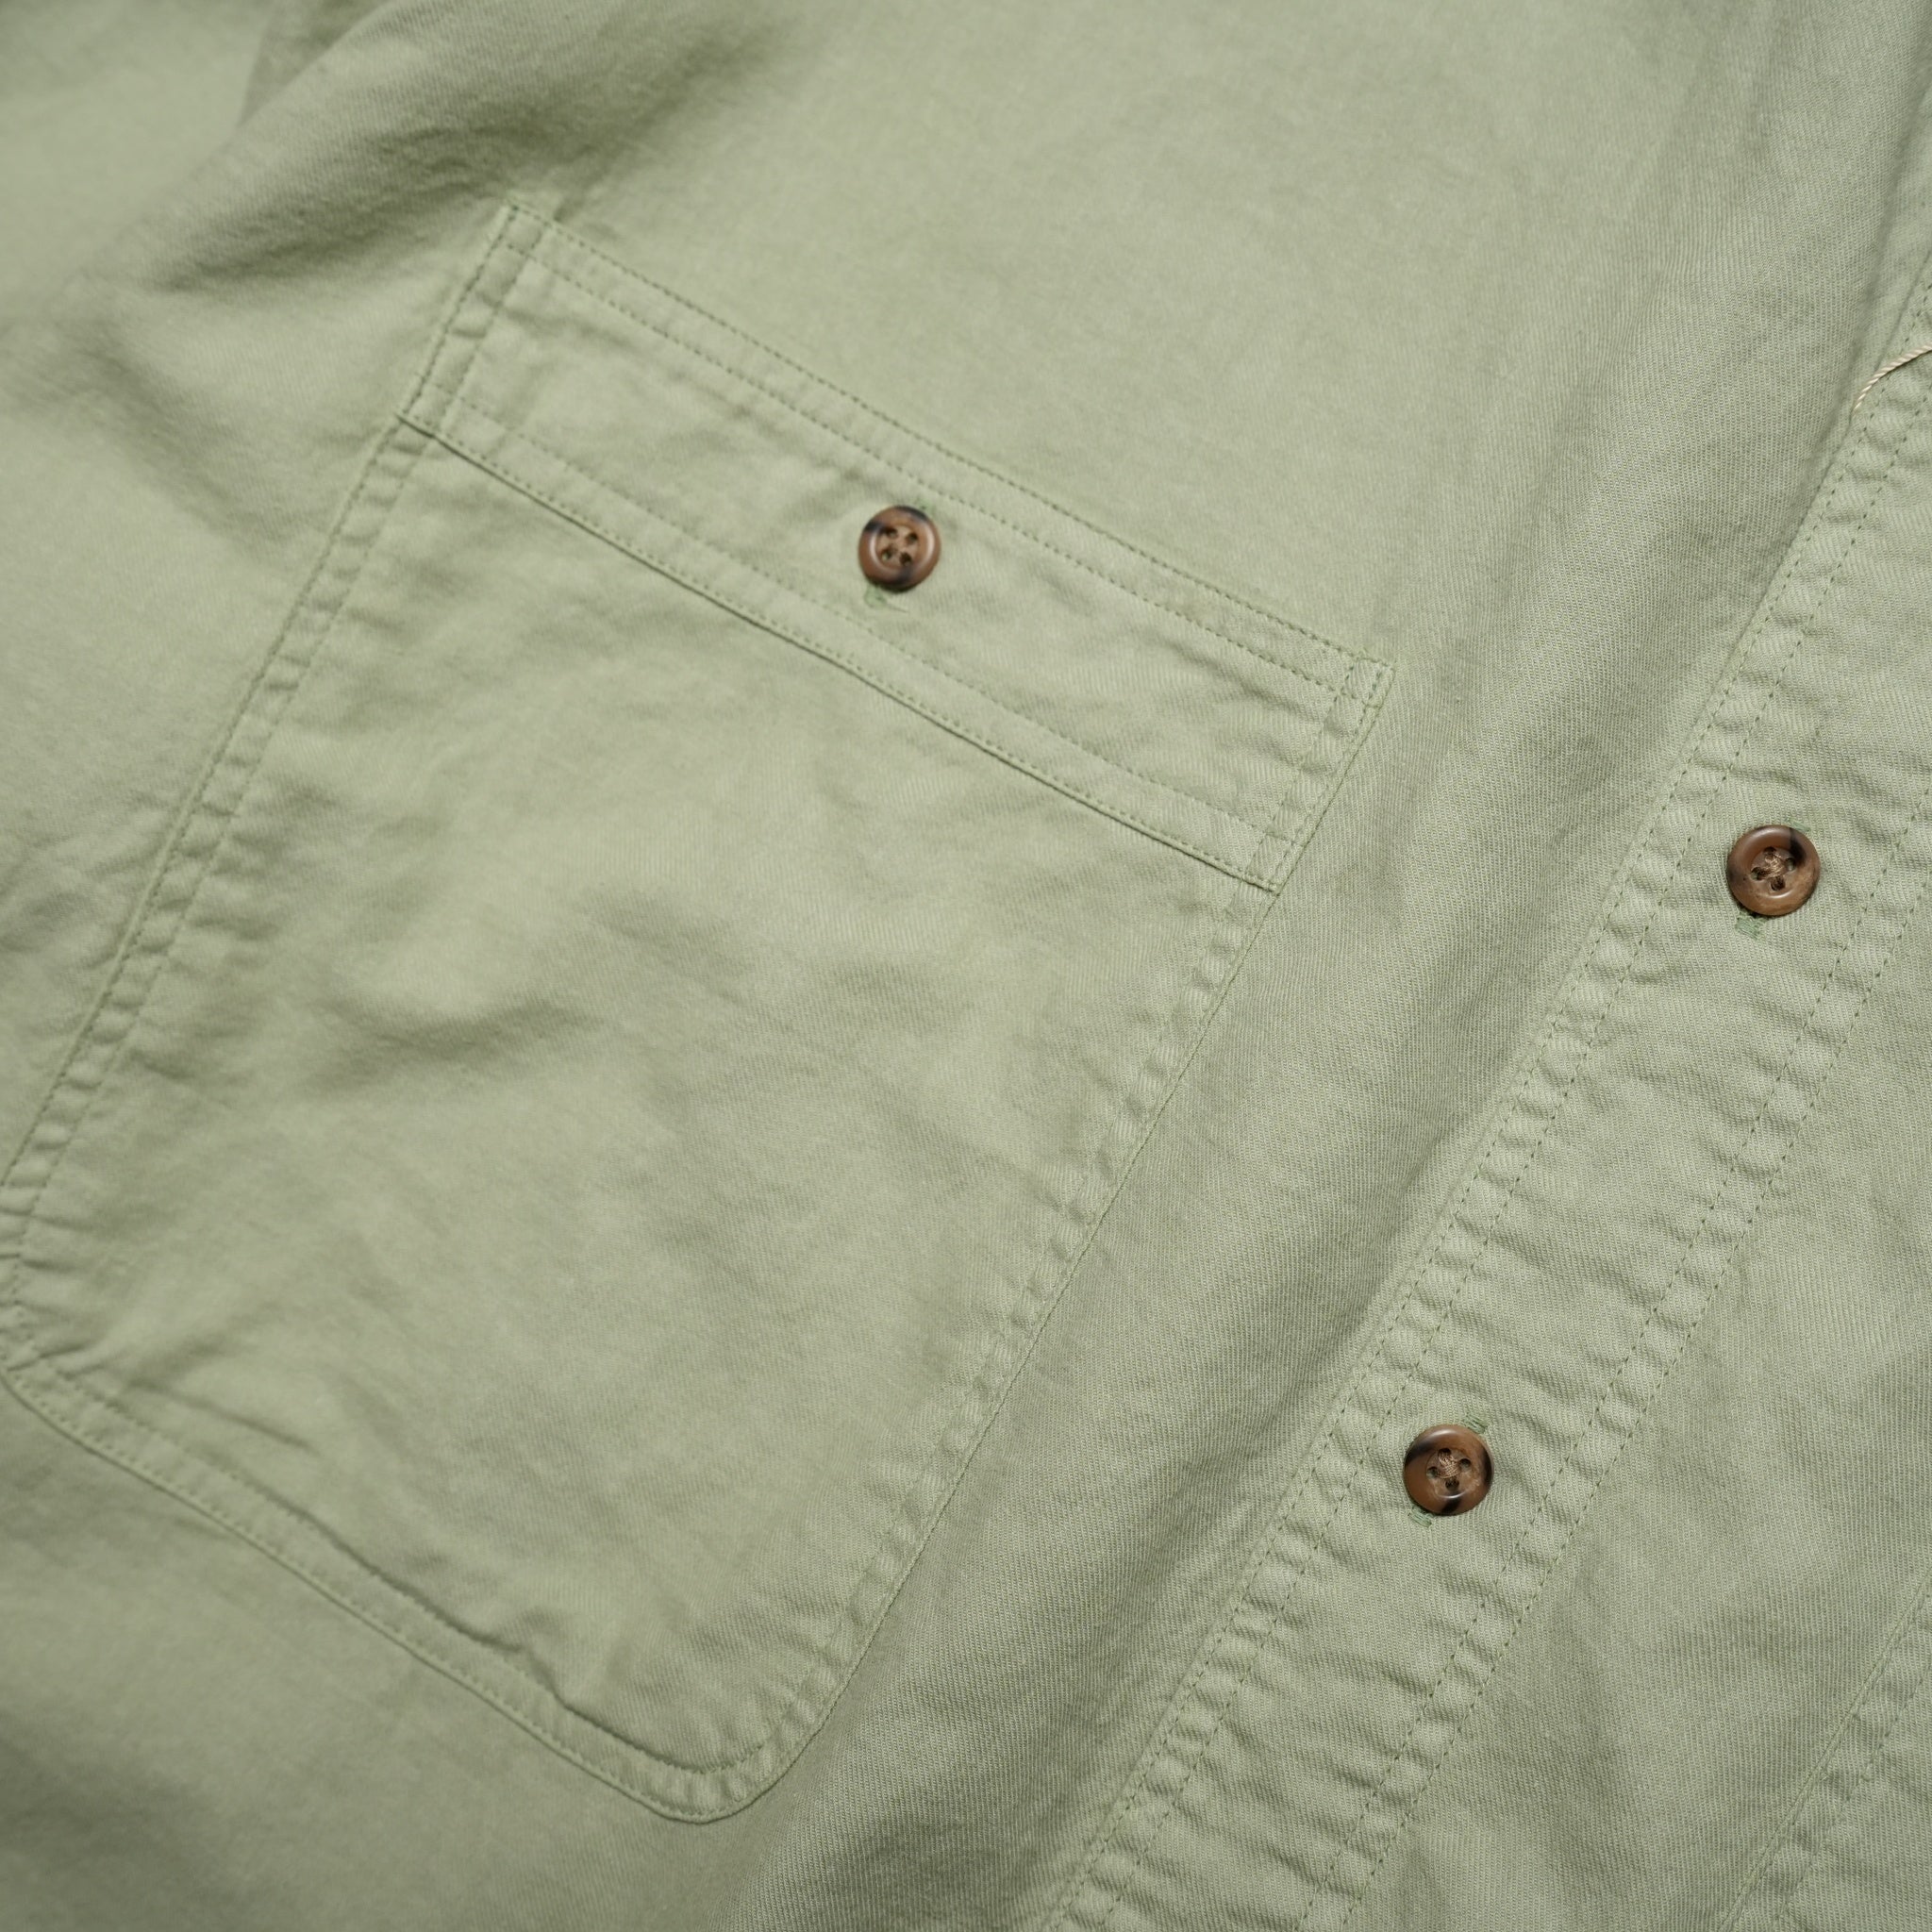 Name:OVER DYE SHIRT | Color:Sage | Size:Regular/Tall 【CITYLIGHTS PRODUCTS_シティライツプロダクツ】